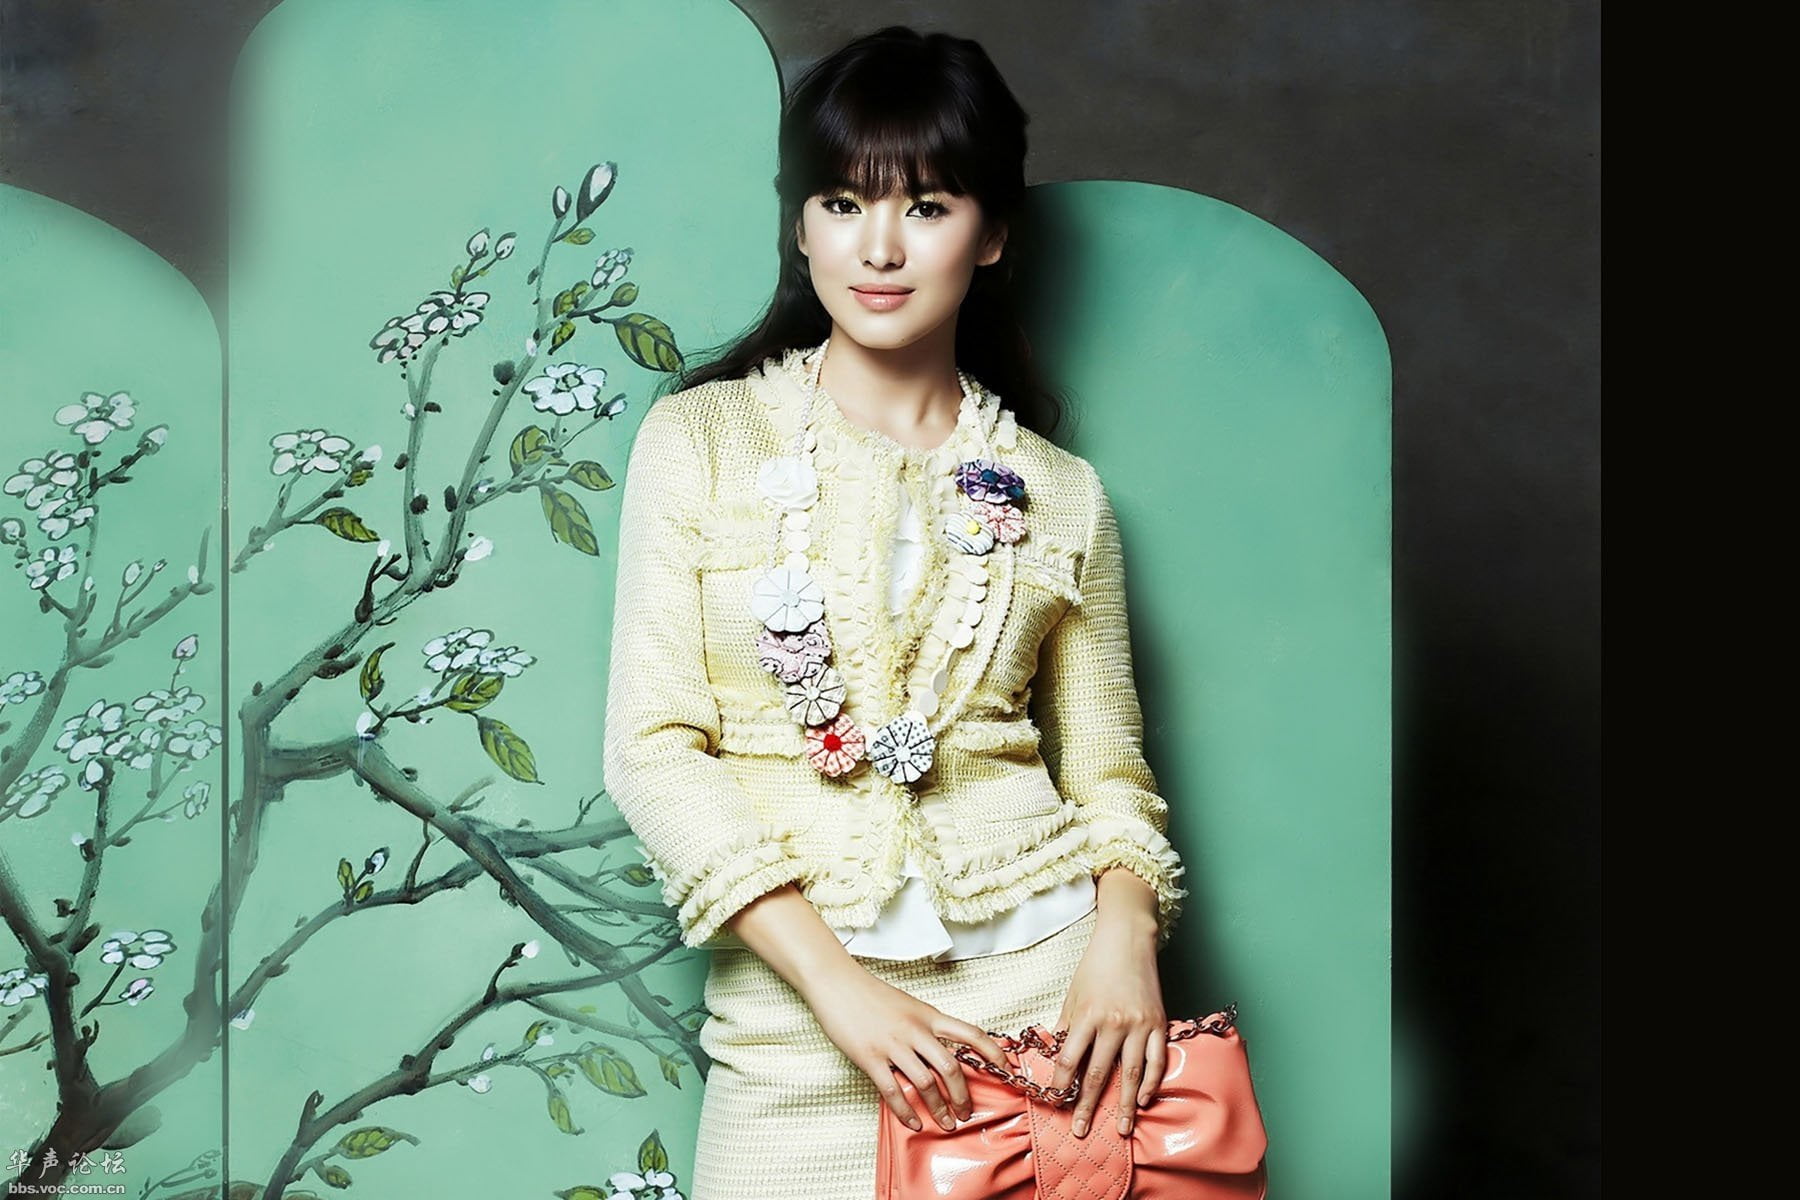 Actresses, Song Hye-Kyo, Korean, one person, young adult, young women